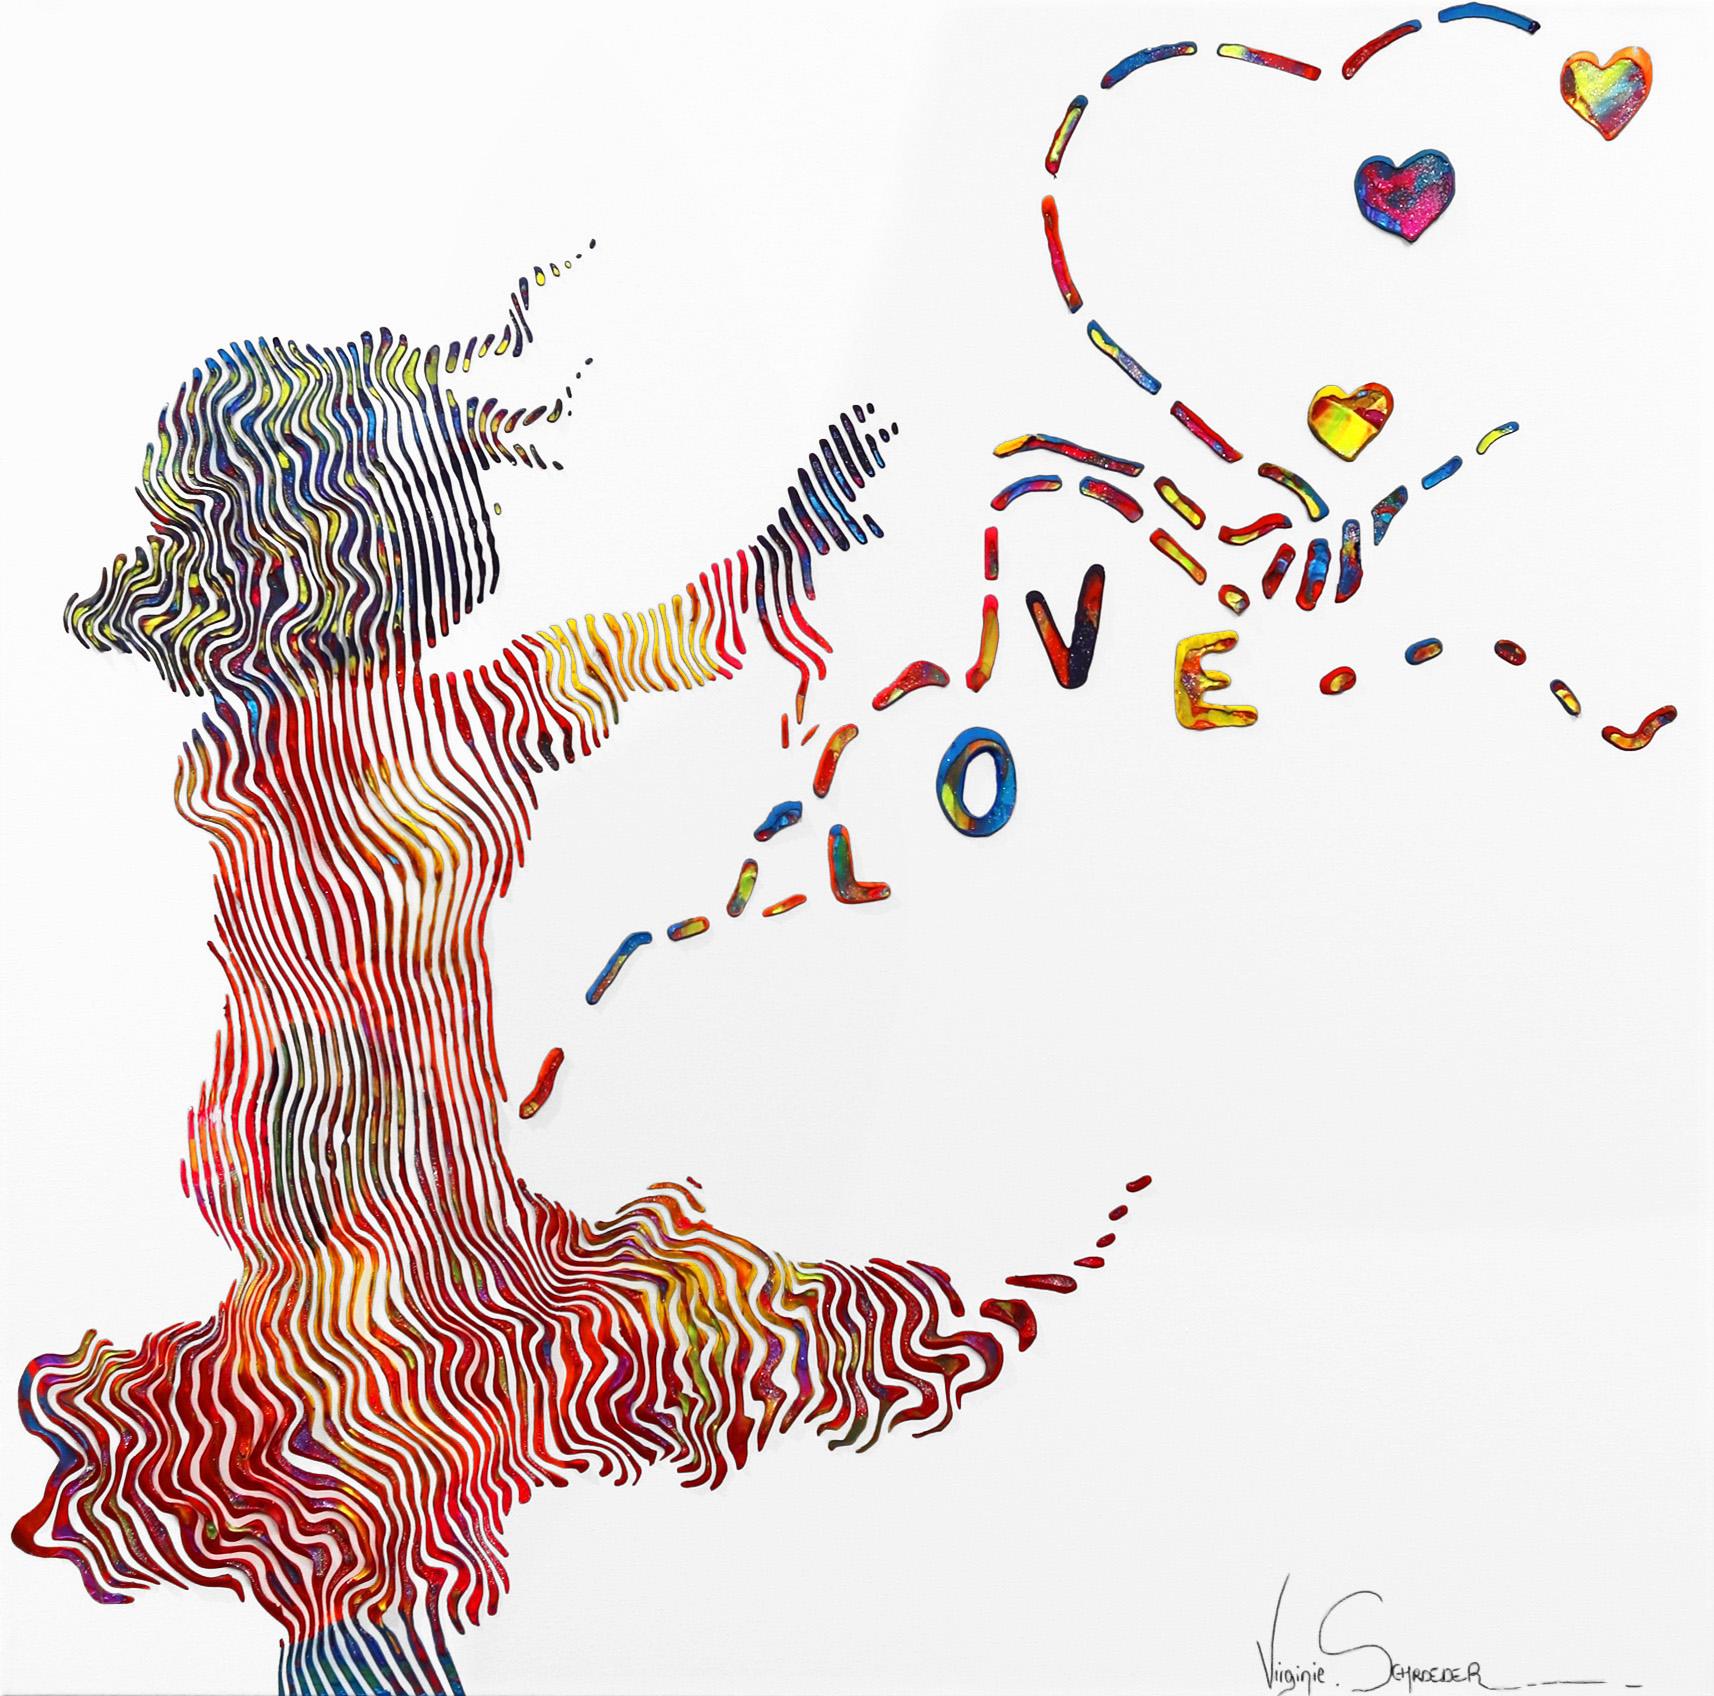 Virginie Schroeder Figurative Painting - Little Girl with the Love Balloon Explosion